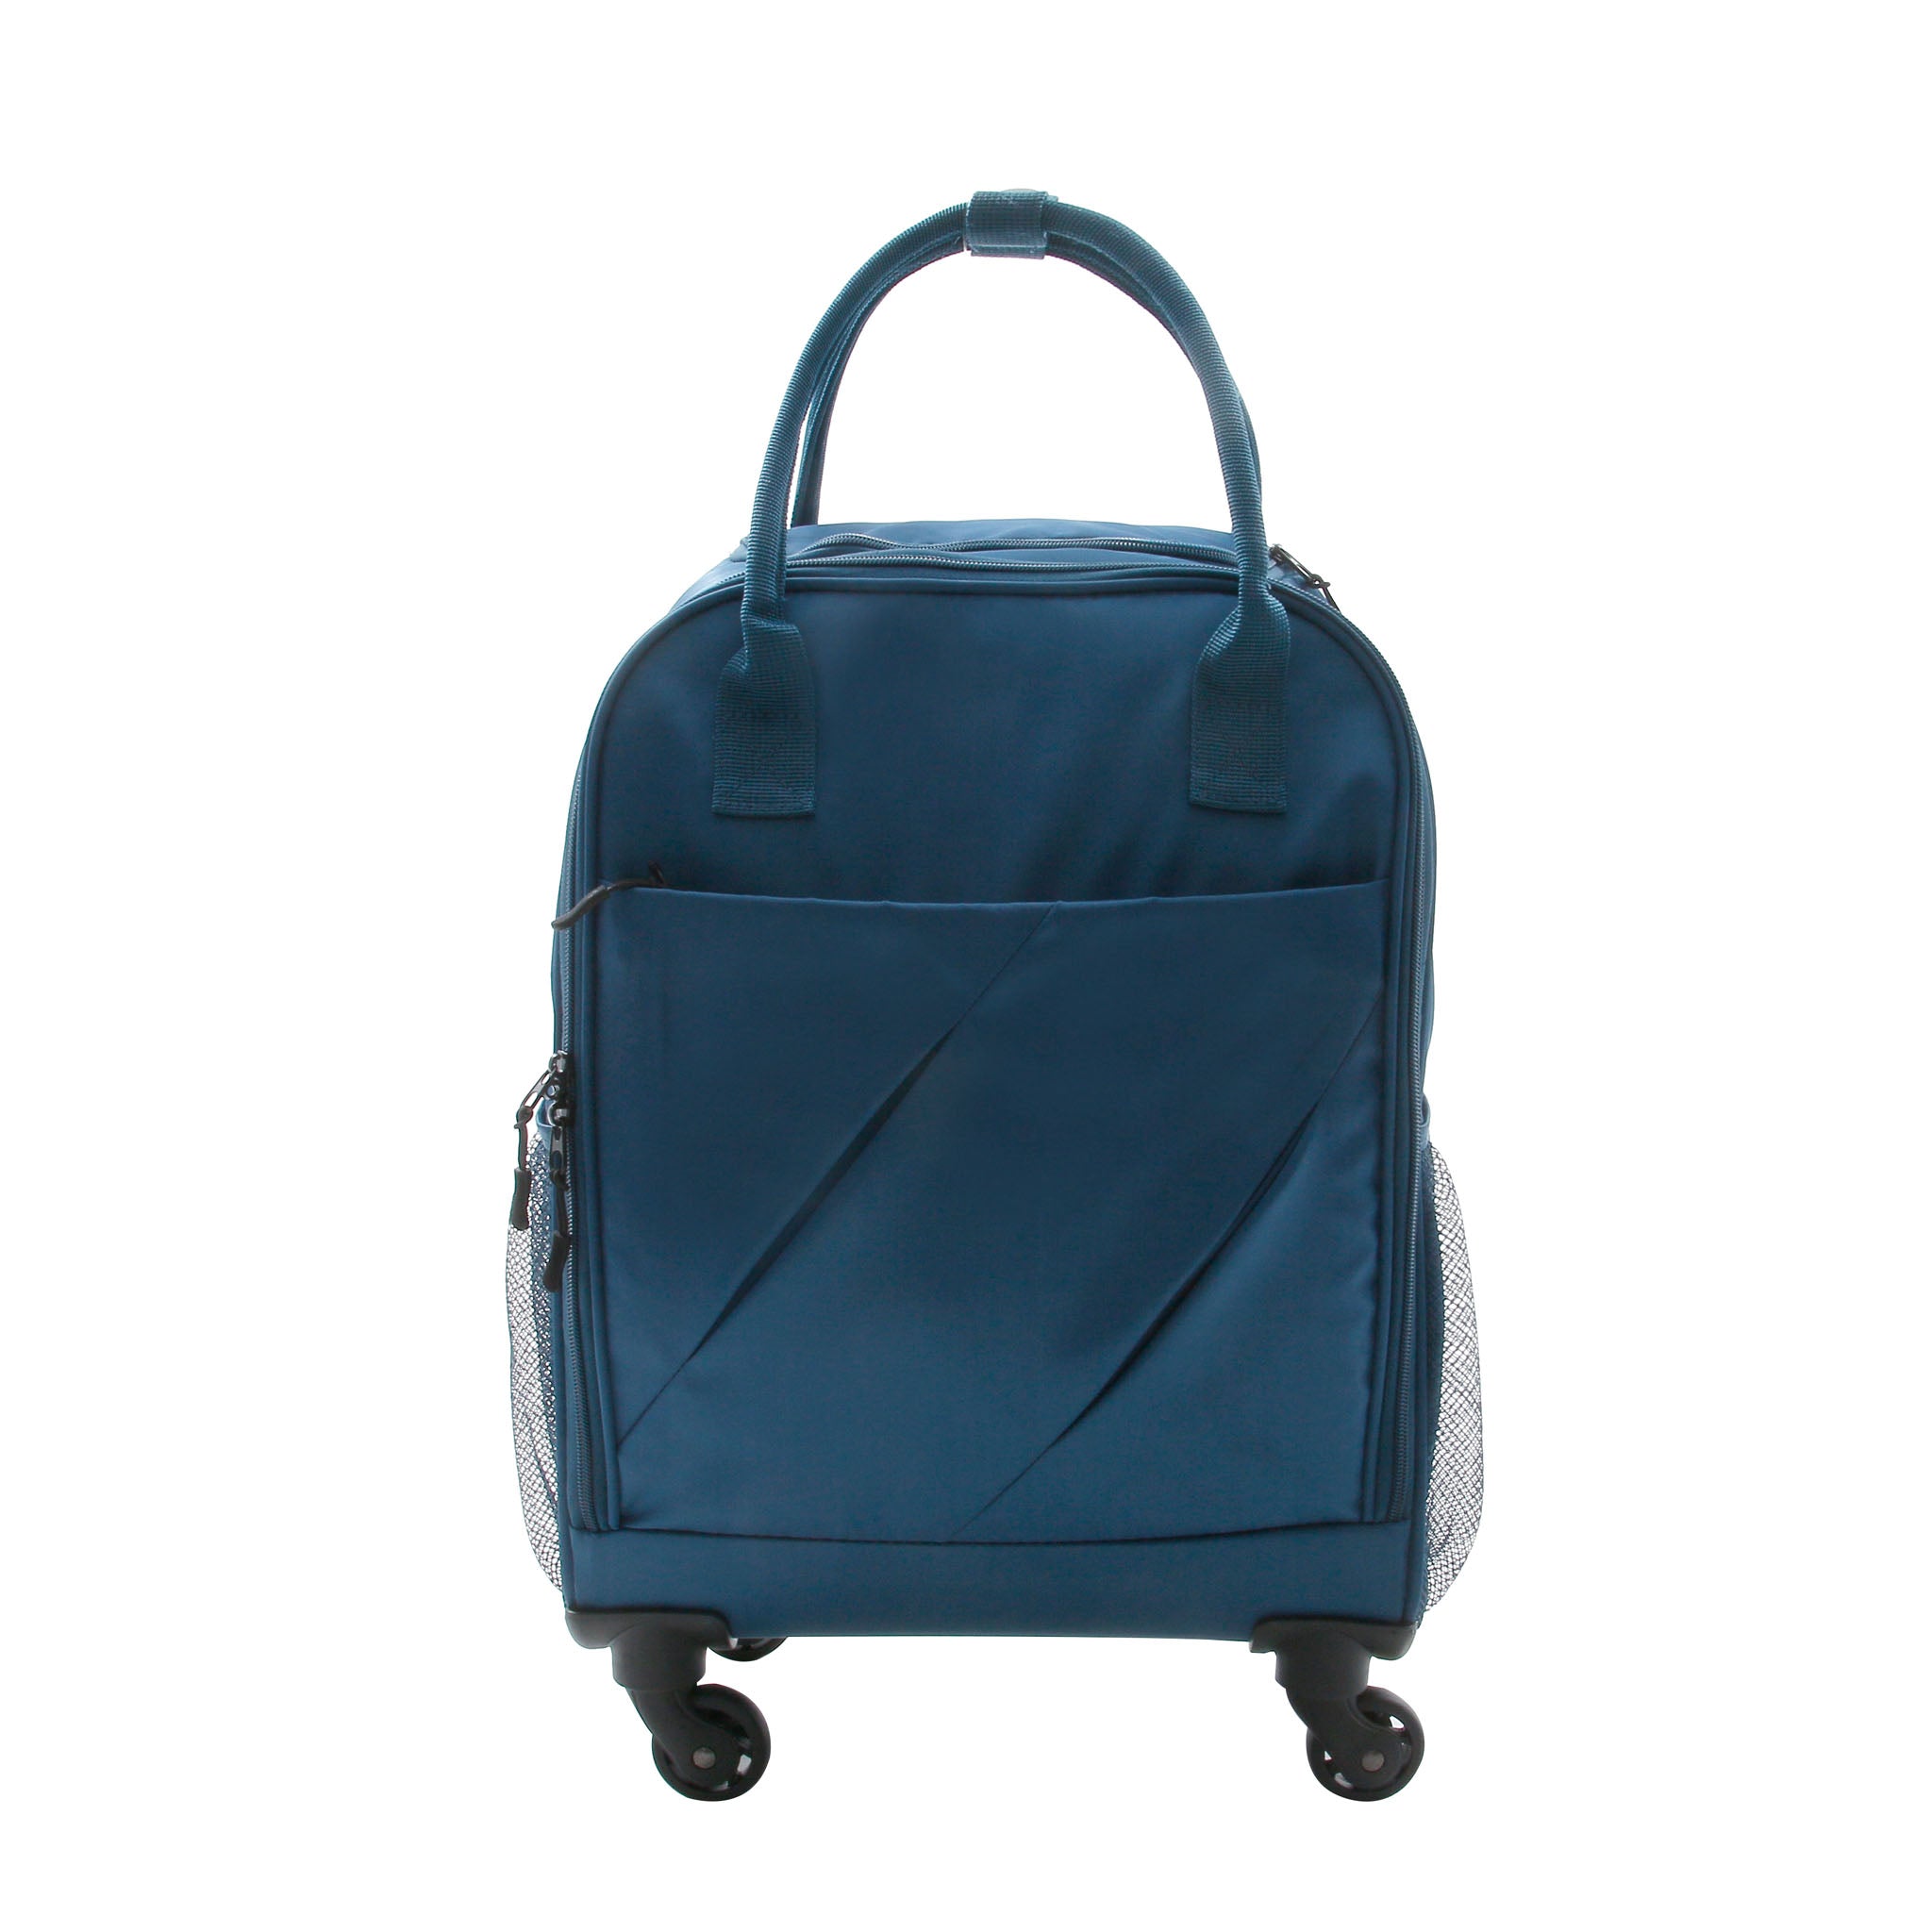 Source Oxford Trolley bag Travel Luggage student suitcase on m.alibaba.com